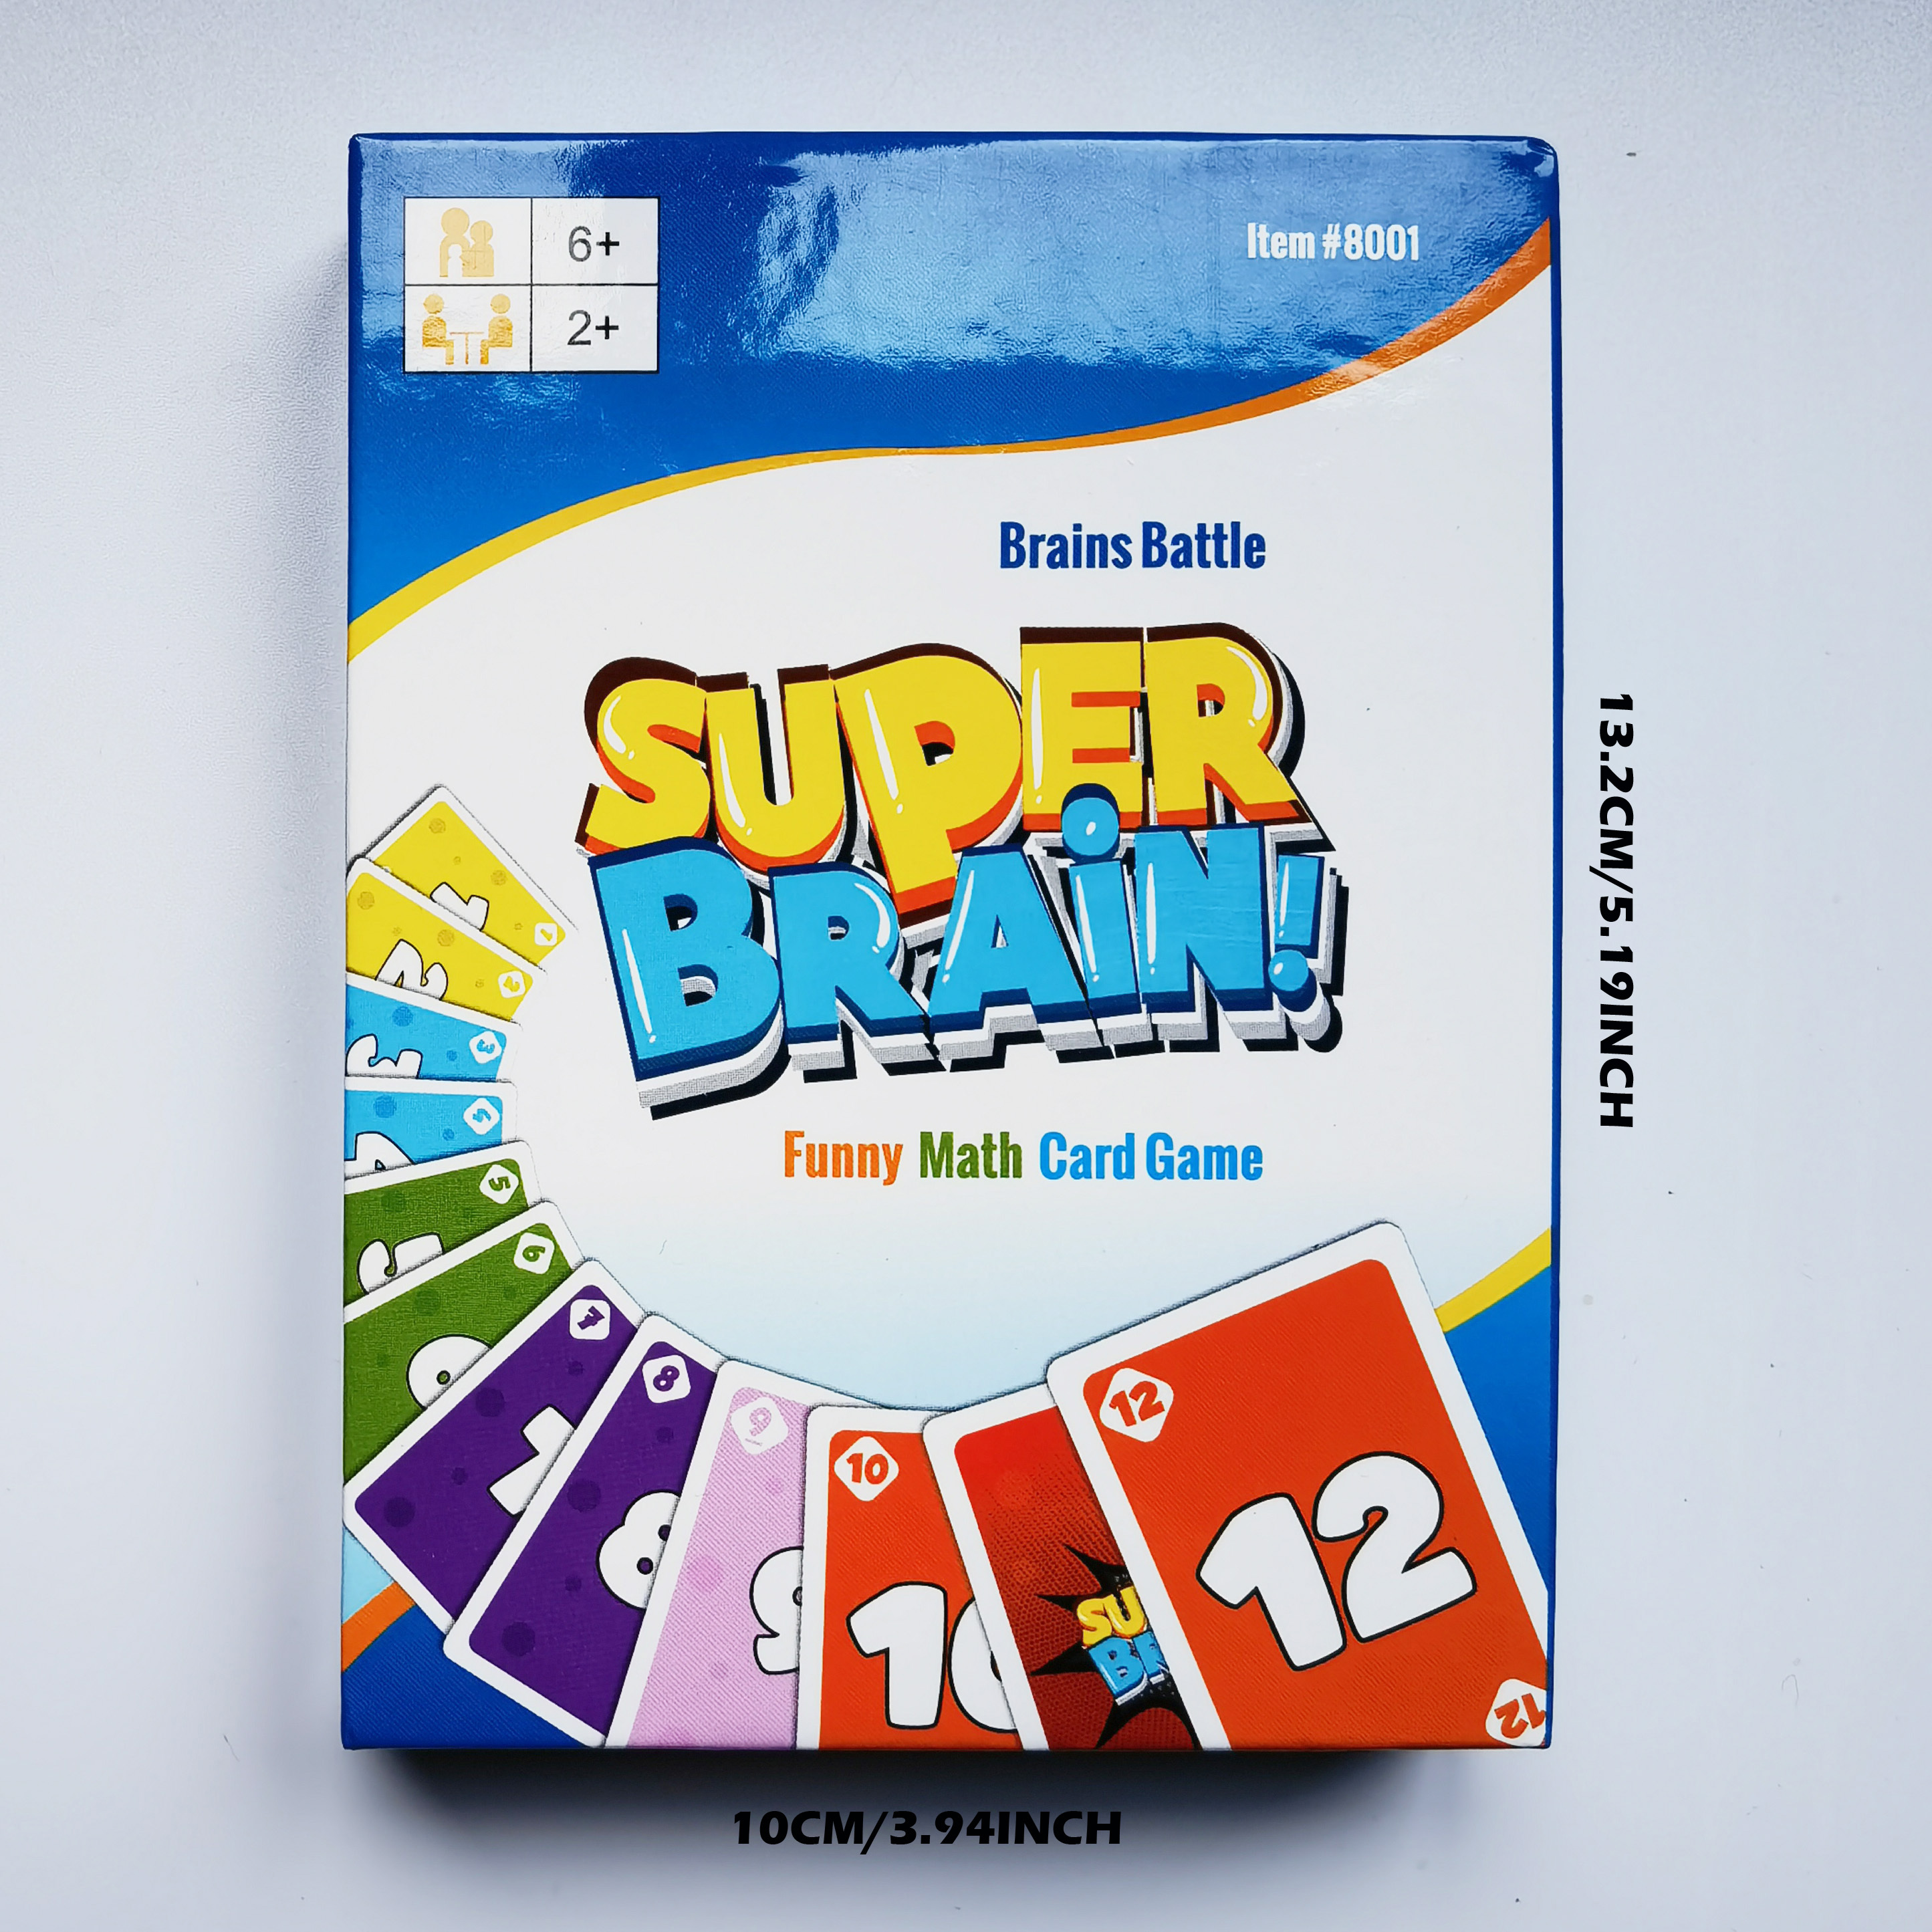 Zoom Math Card Game by TREND® TEPT76304